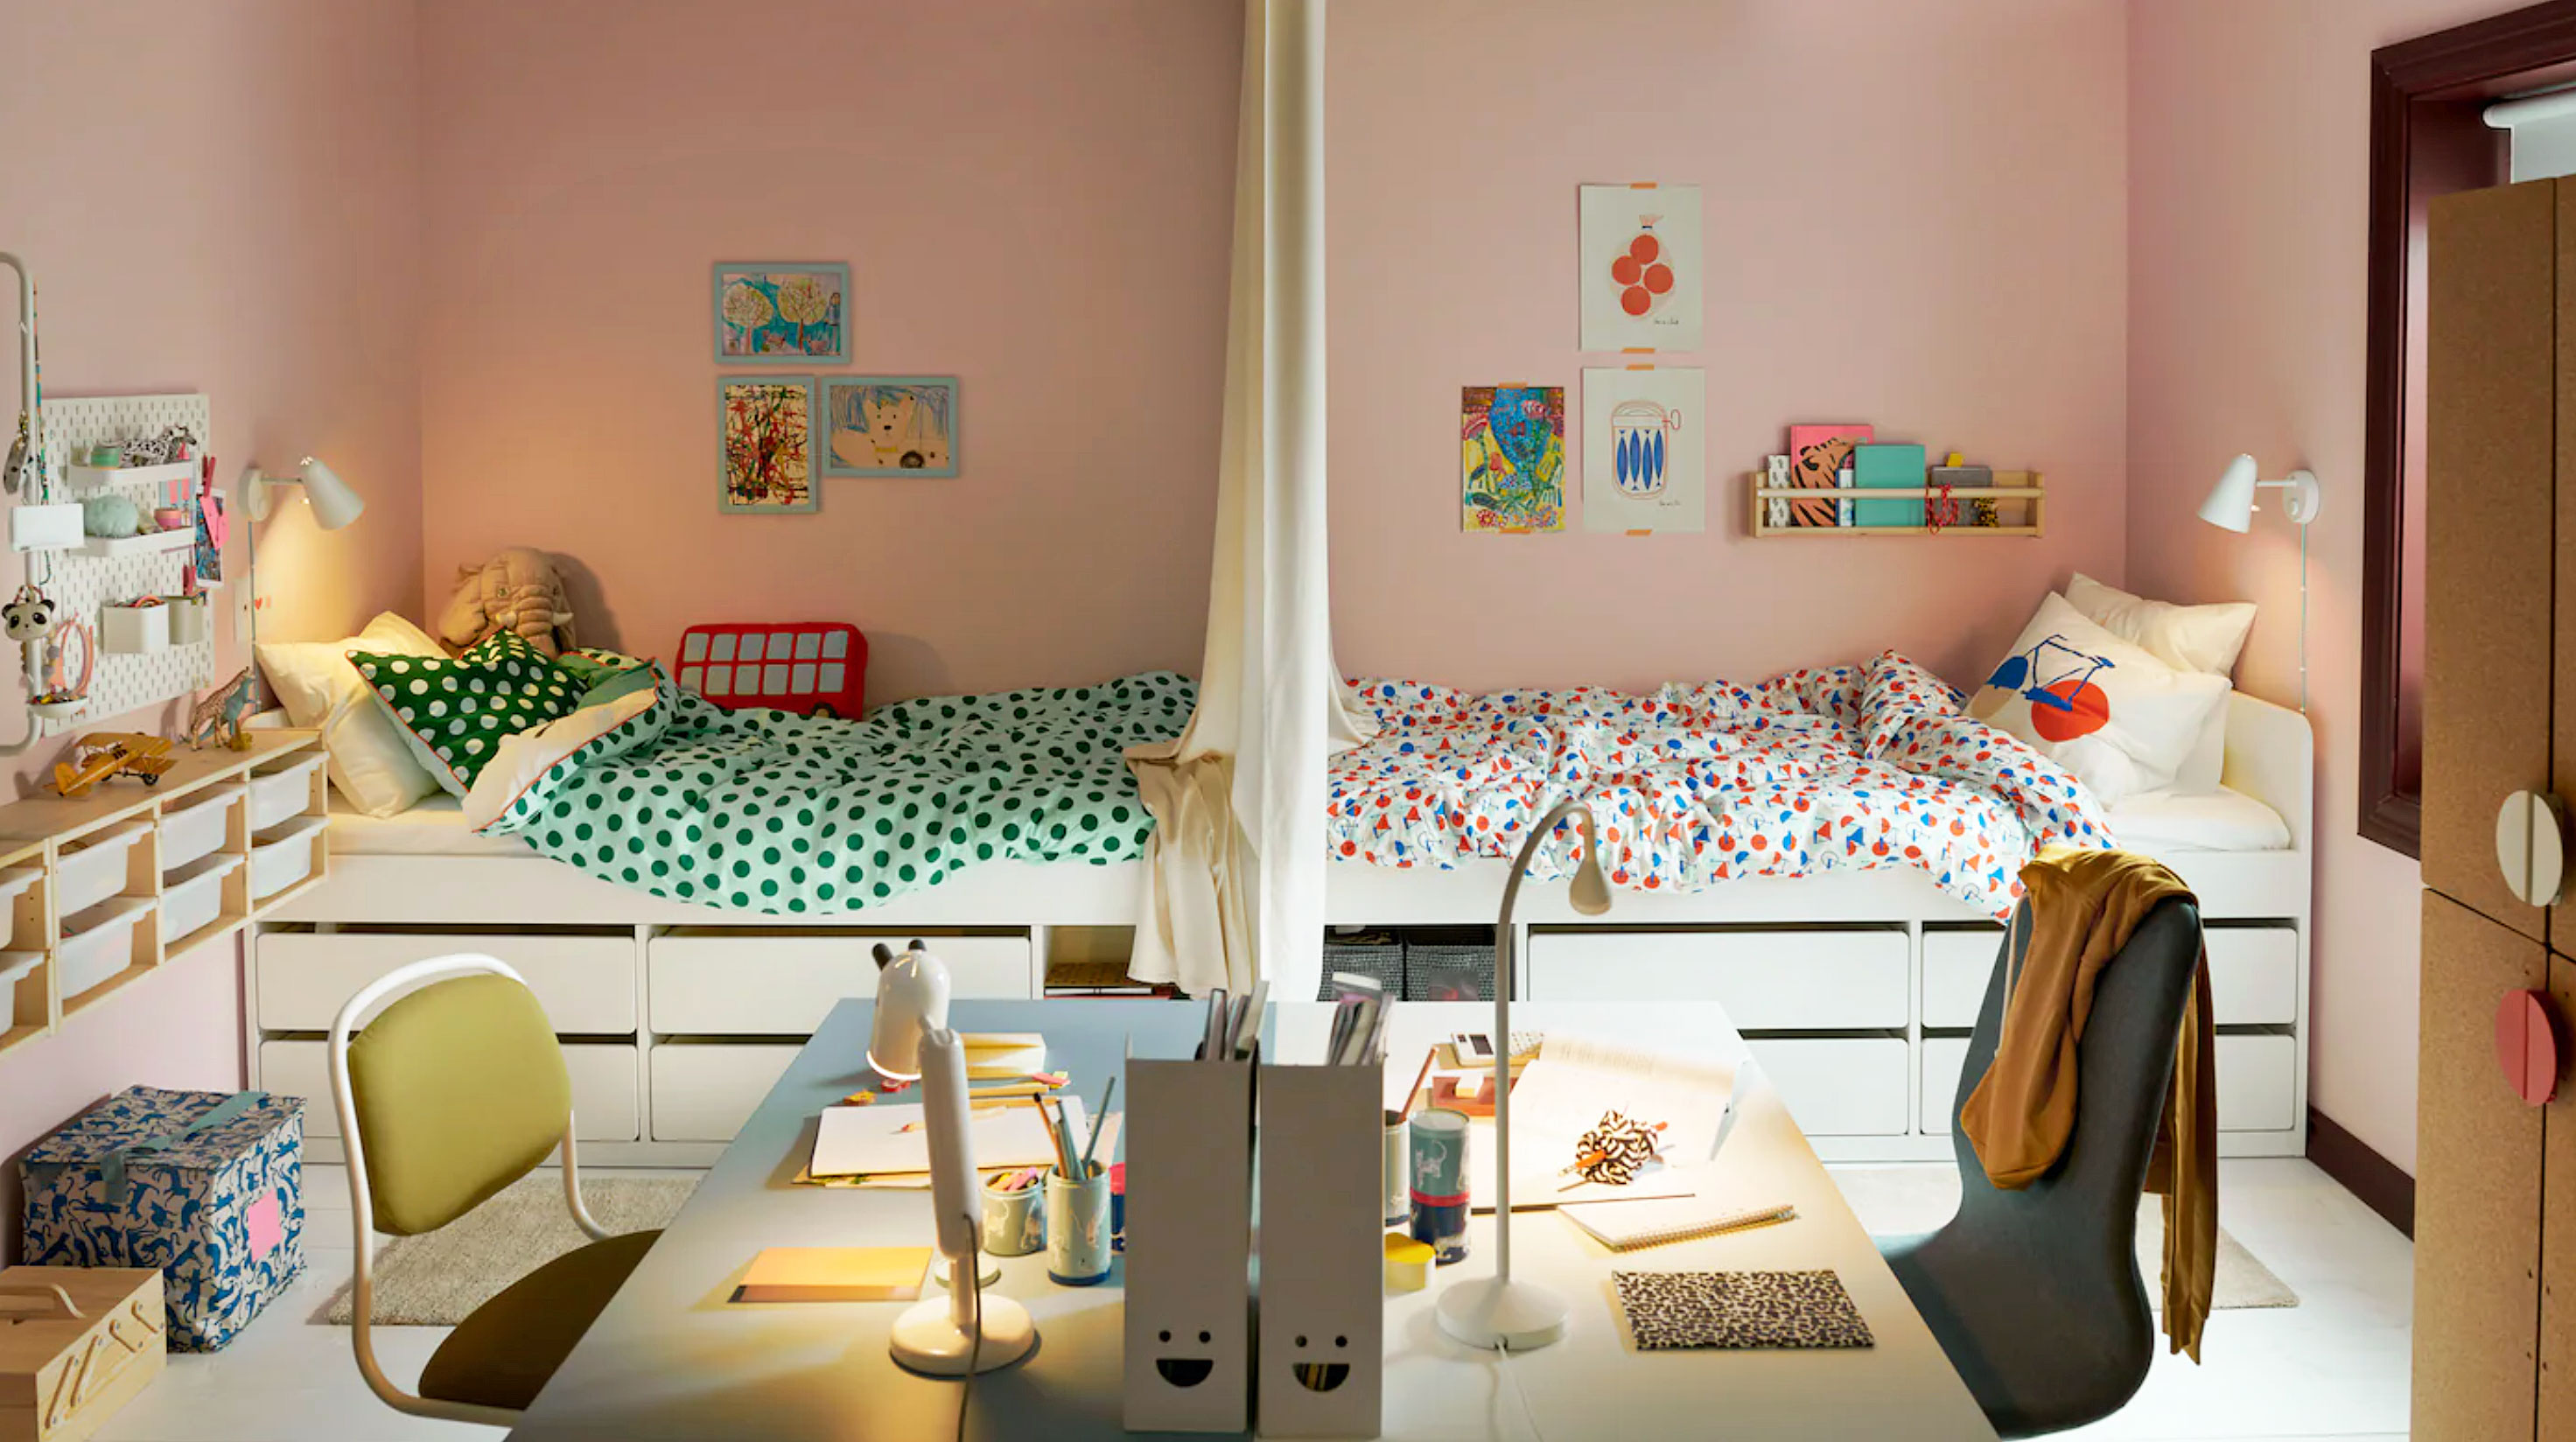 Shared bedroom ideas: How to divide a shared kids' room | Homes & Gardens |